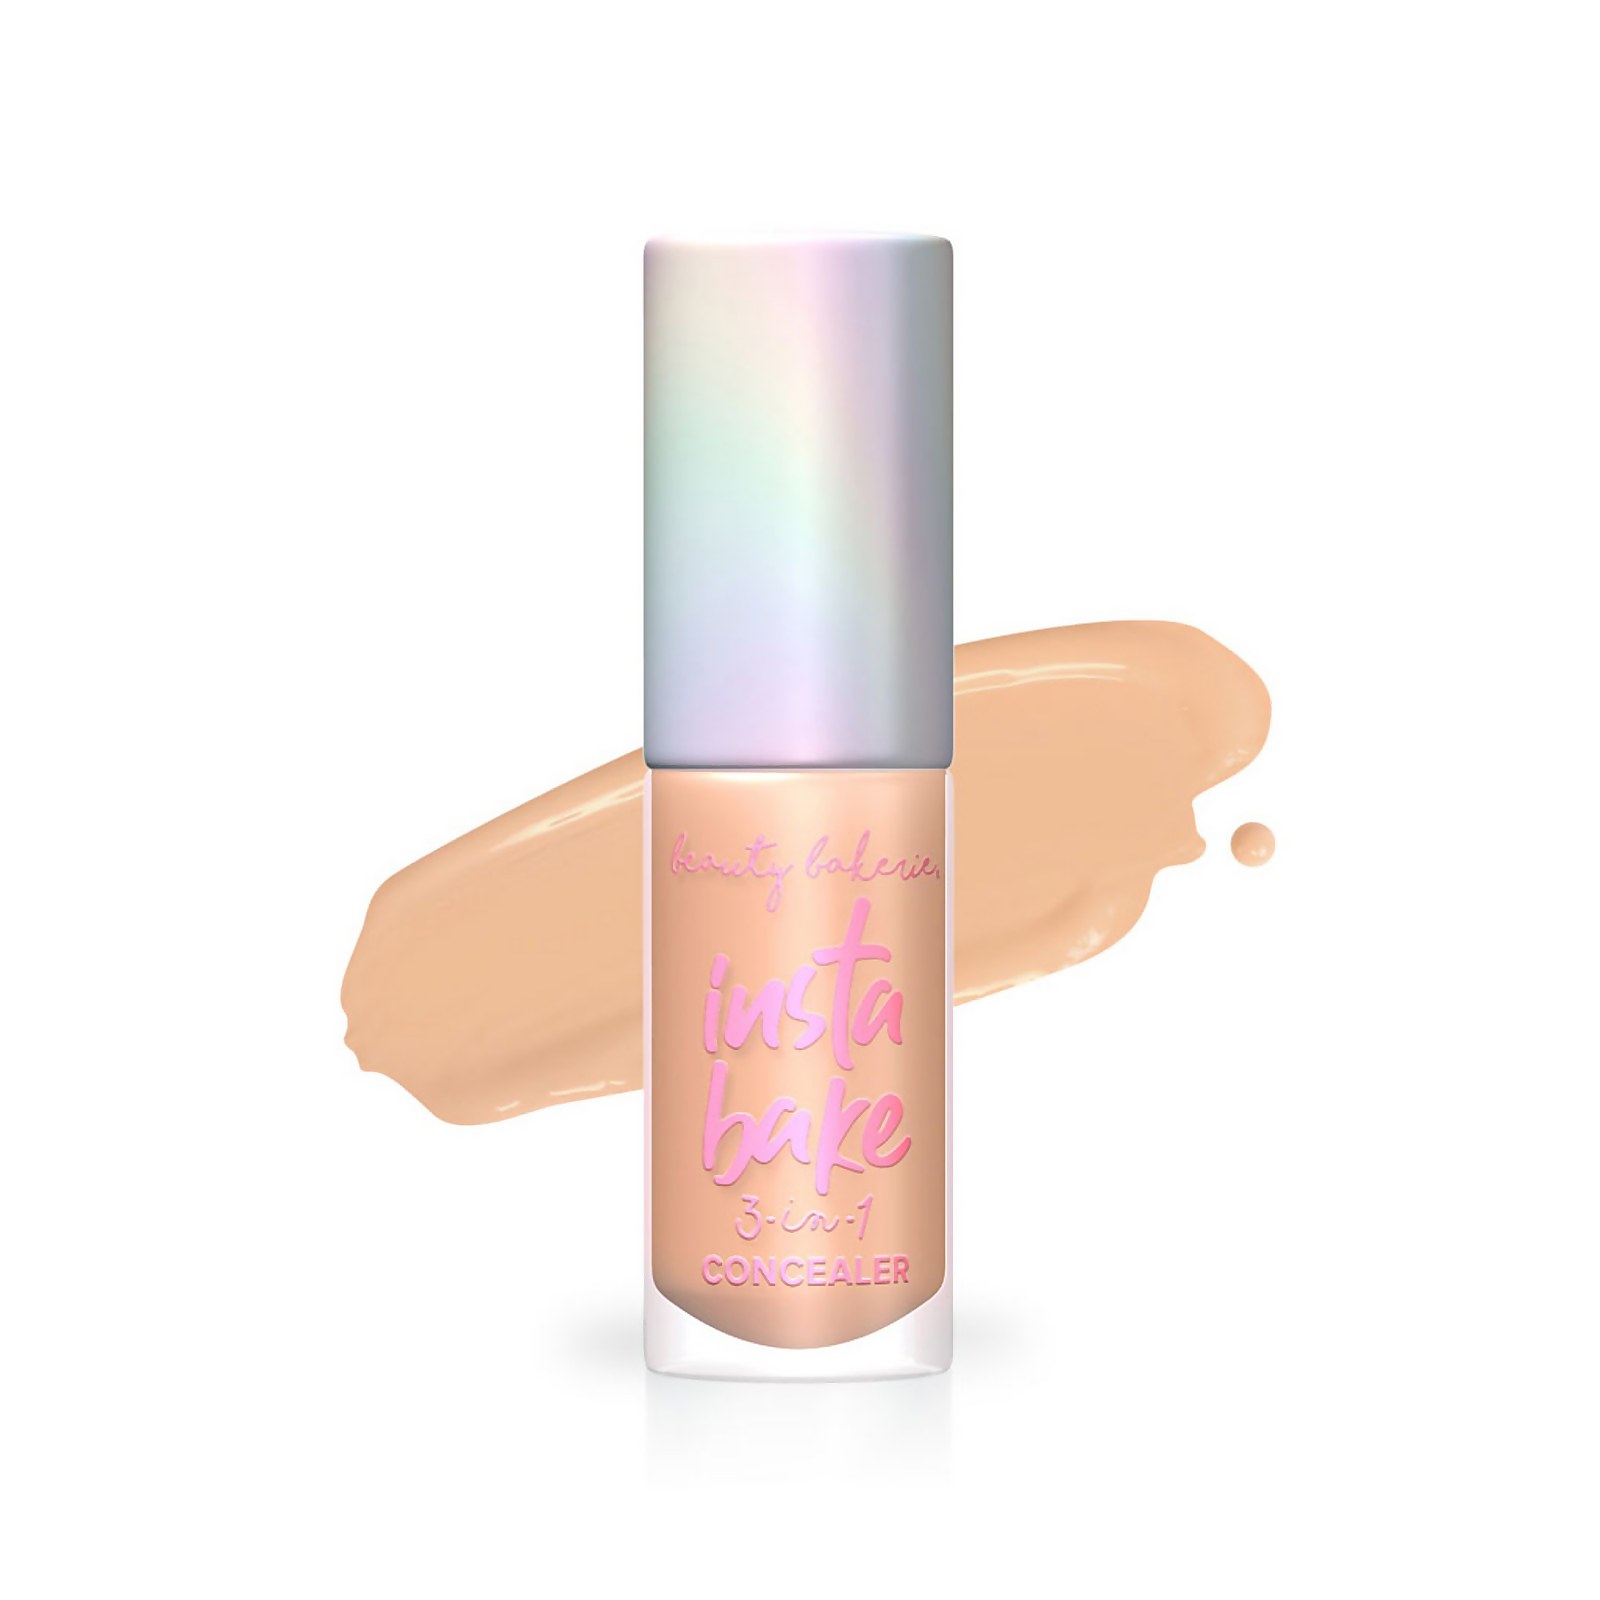 Image of Beauty Bakerie InstaBake 3-in-1 Hydrating Concealer (Various Shades) - 013 Disturb the Piece